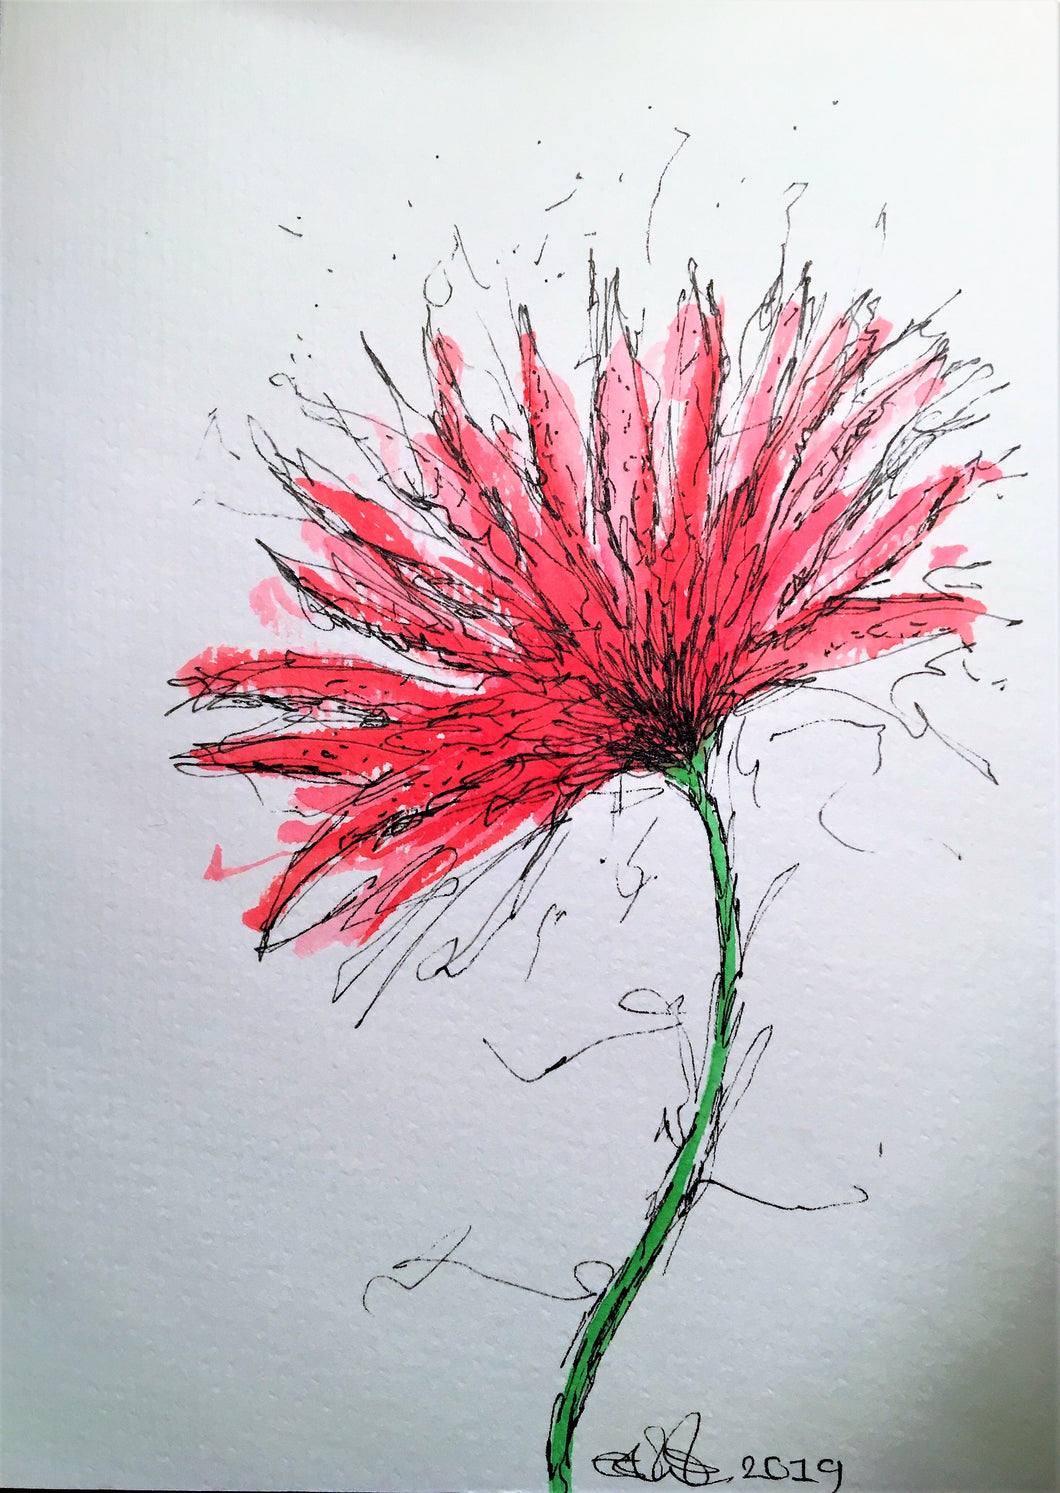 Handpainted Watercolour Greeting Card - Abstract Red/Pink Spiky Flower Design - eDgE dEsiGn London